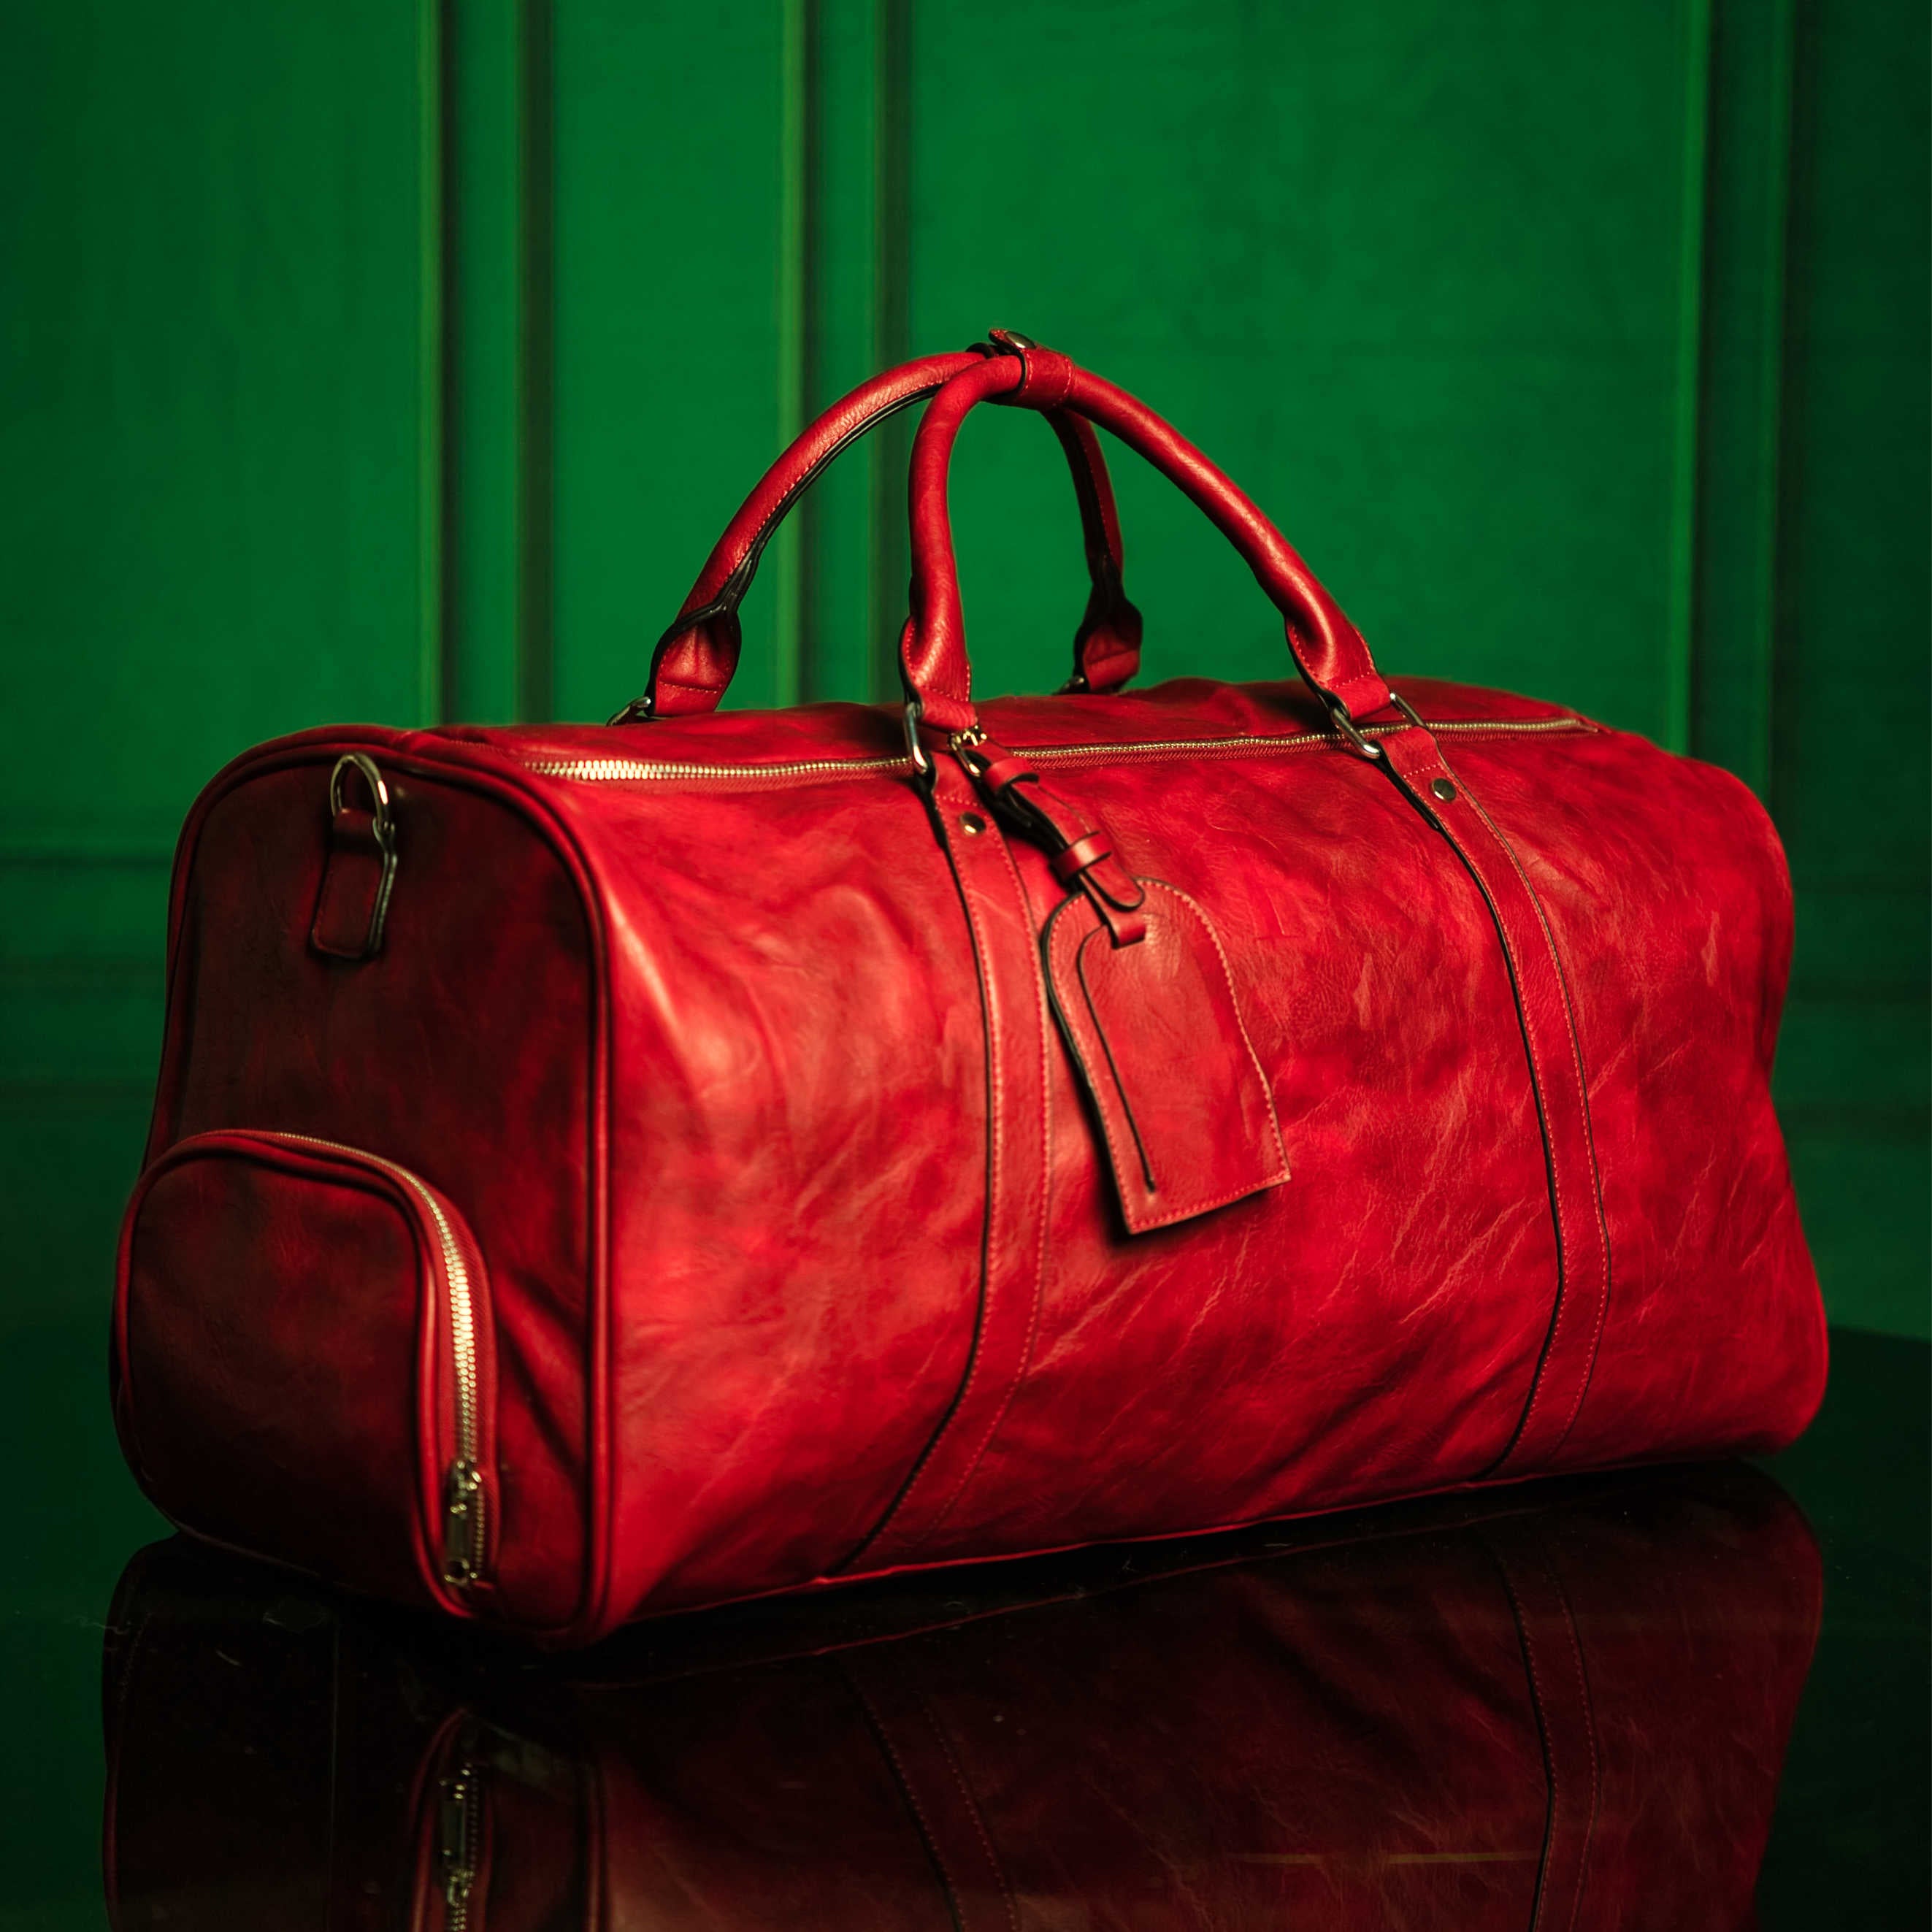 Maroon Luciano Leather 3 Bag Set - Sole Premise